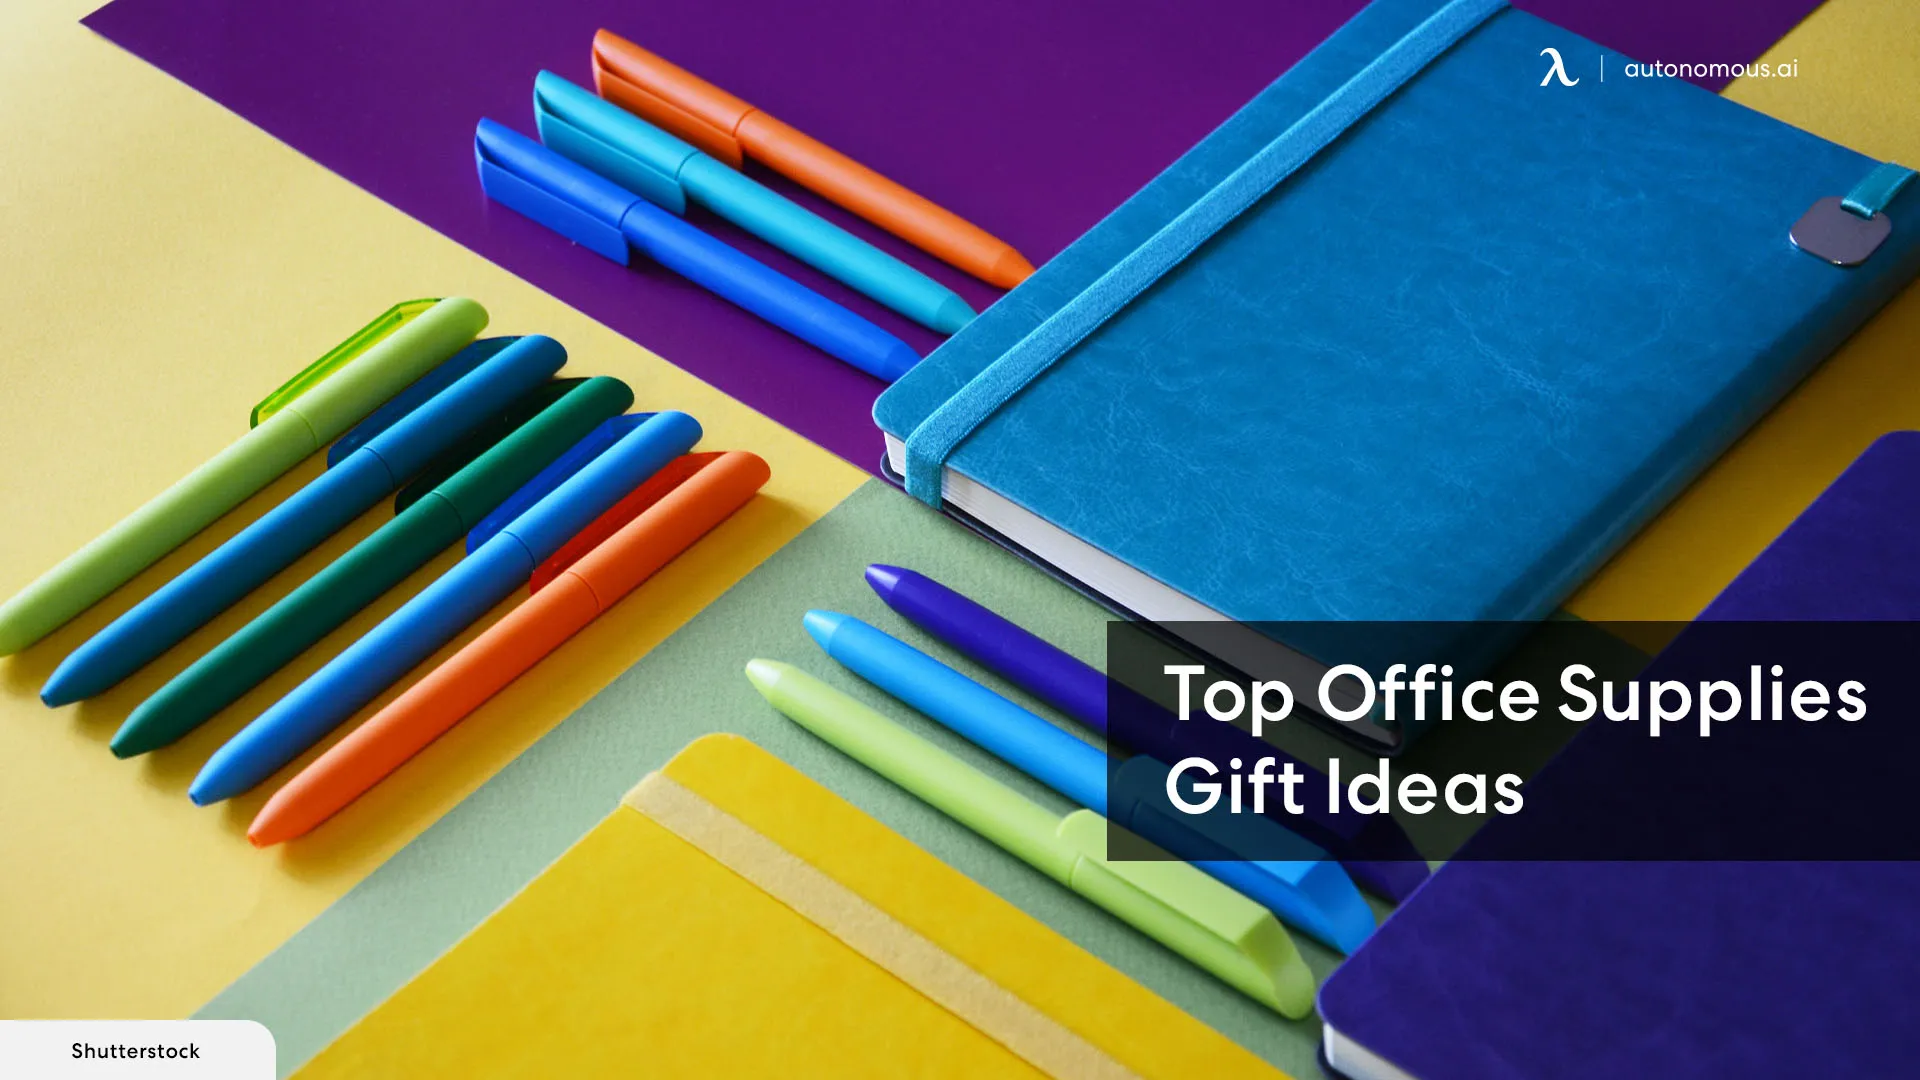 Top Office Supplies as Gifts for the Workplace